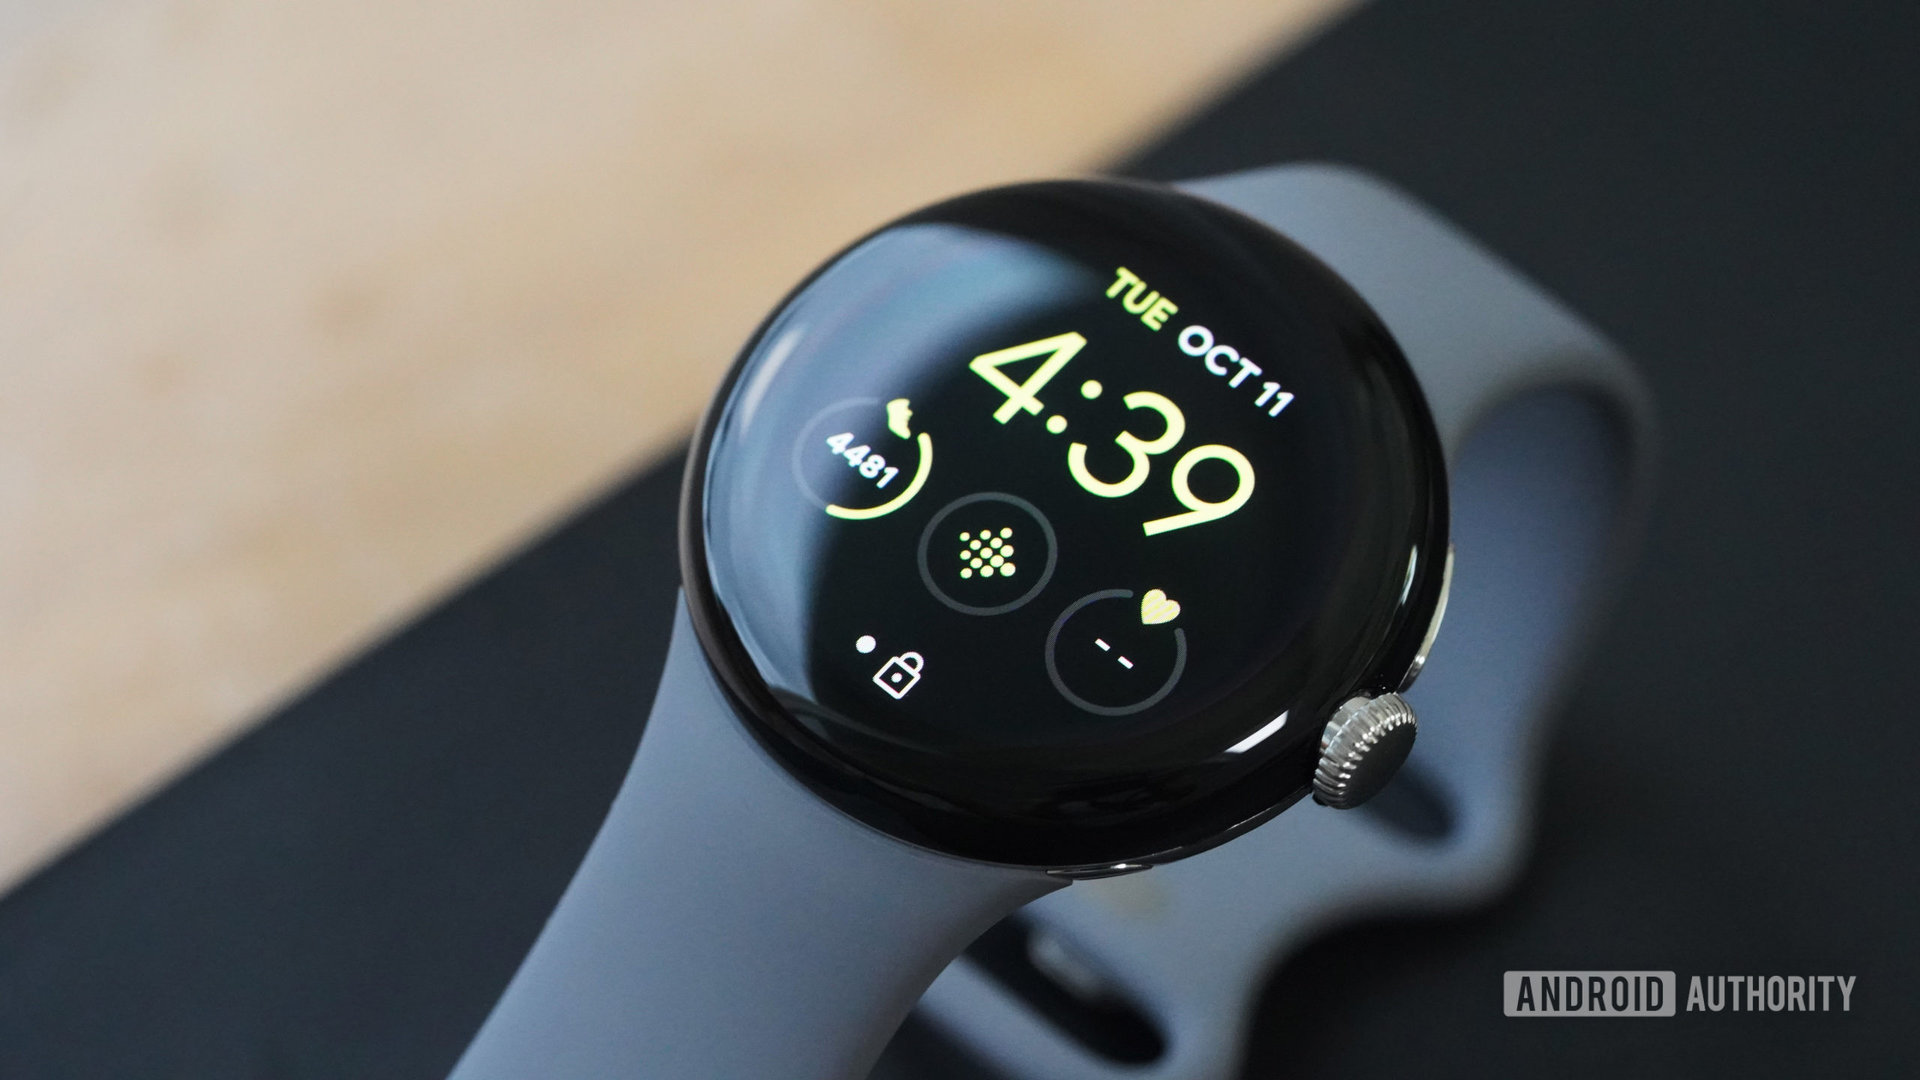 A Google Pixel Watch rests on a yoga mat and displays a user's activity stats on a standard watch face.